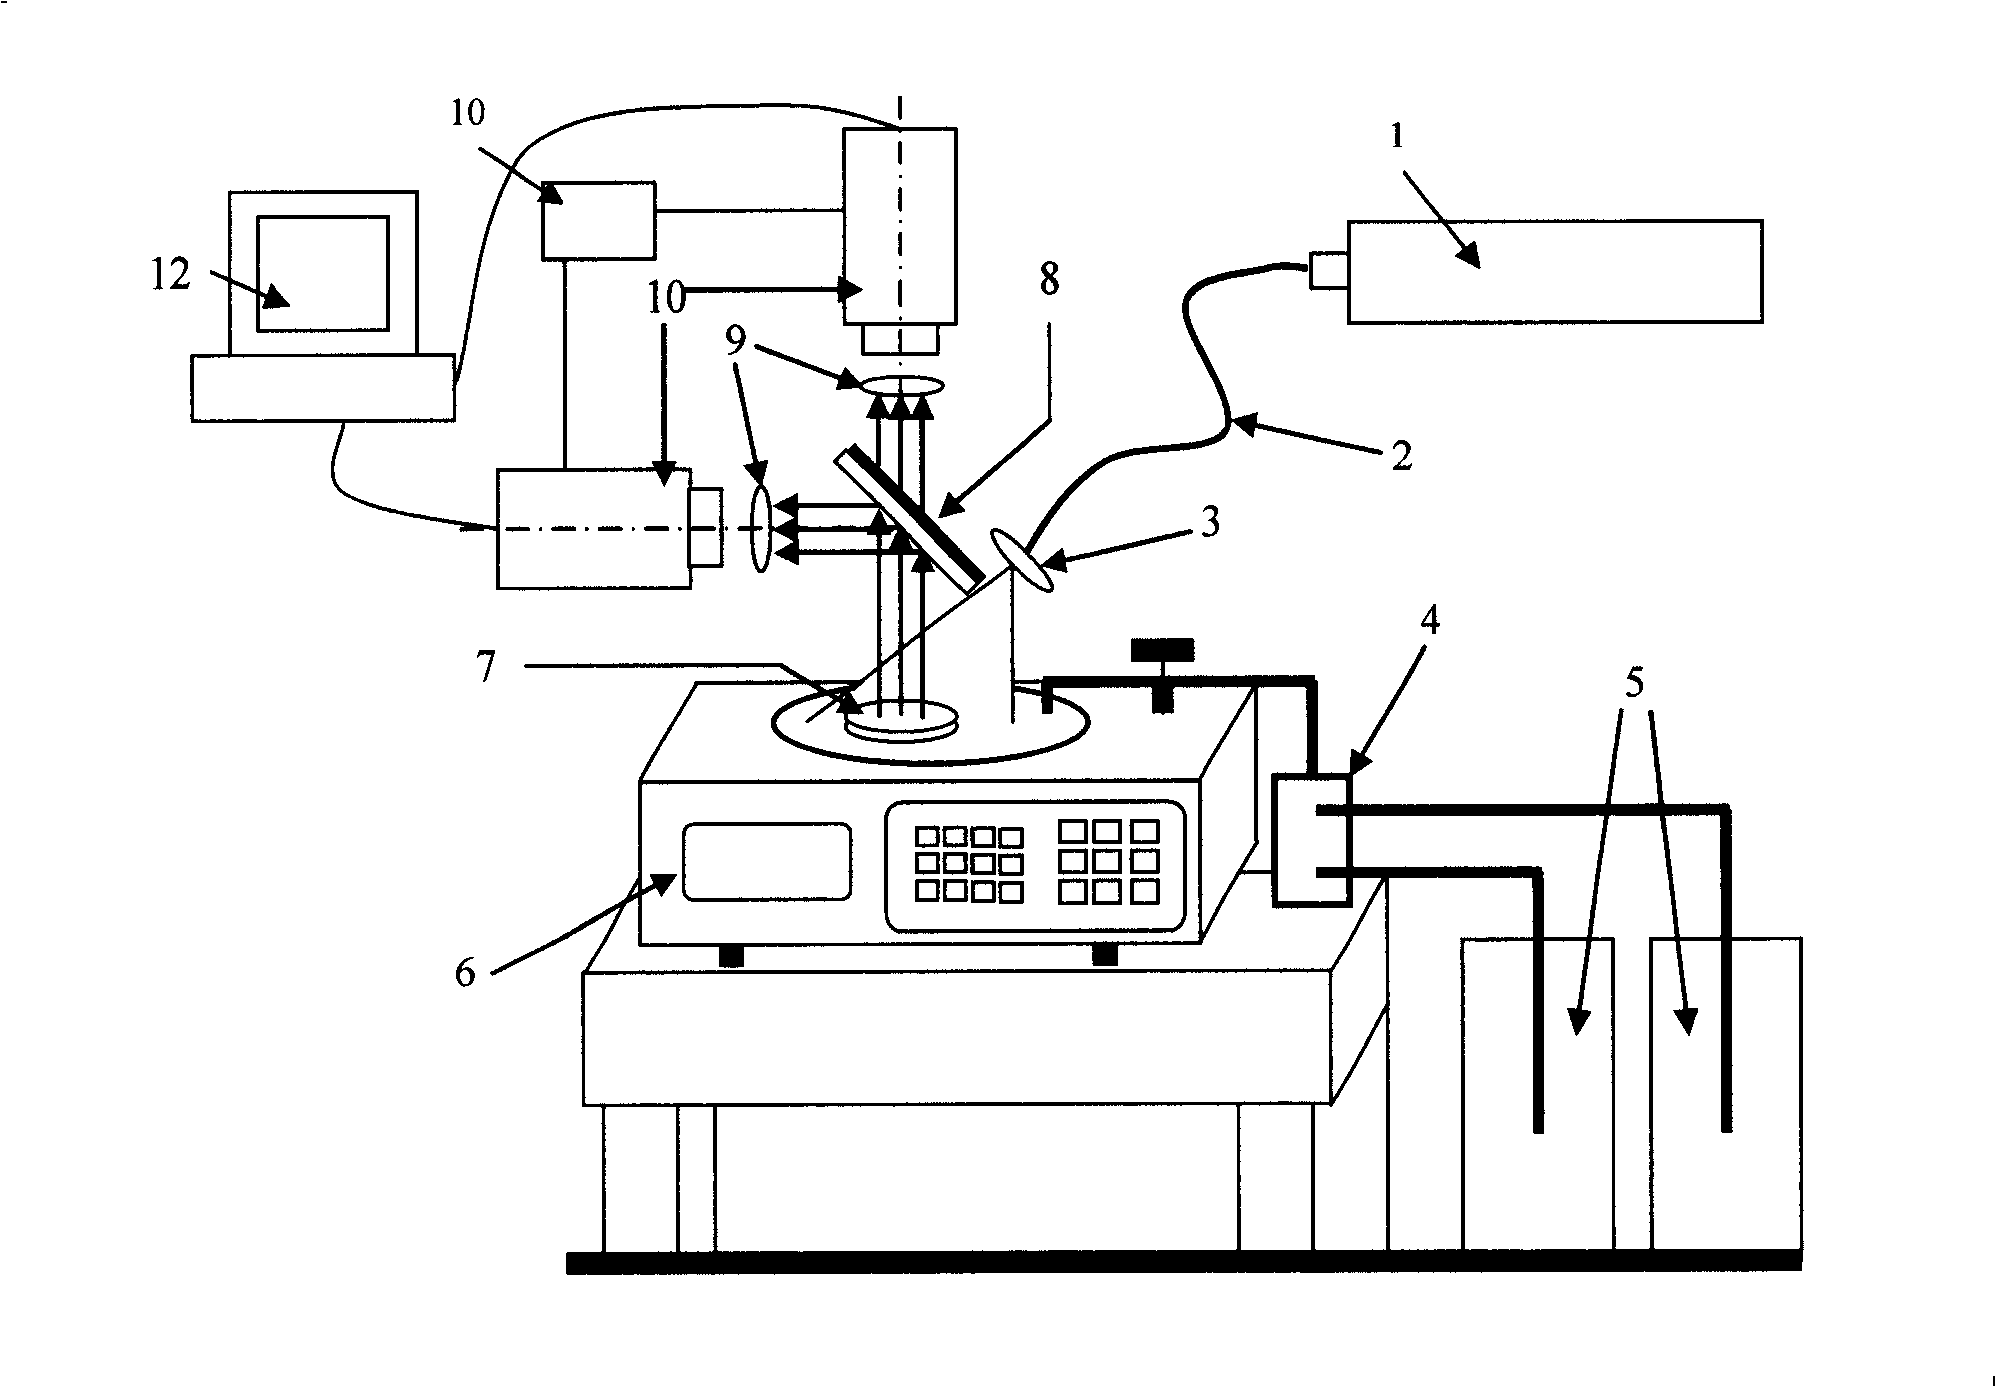 Measuring apparatus of wafer lower fluid film intermediate variable in CMP process